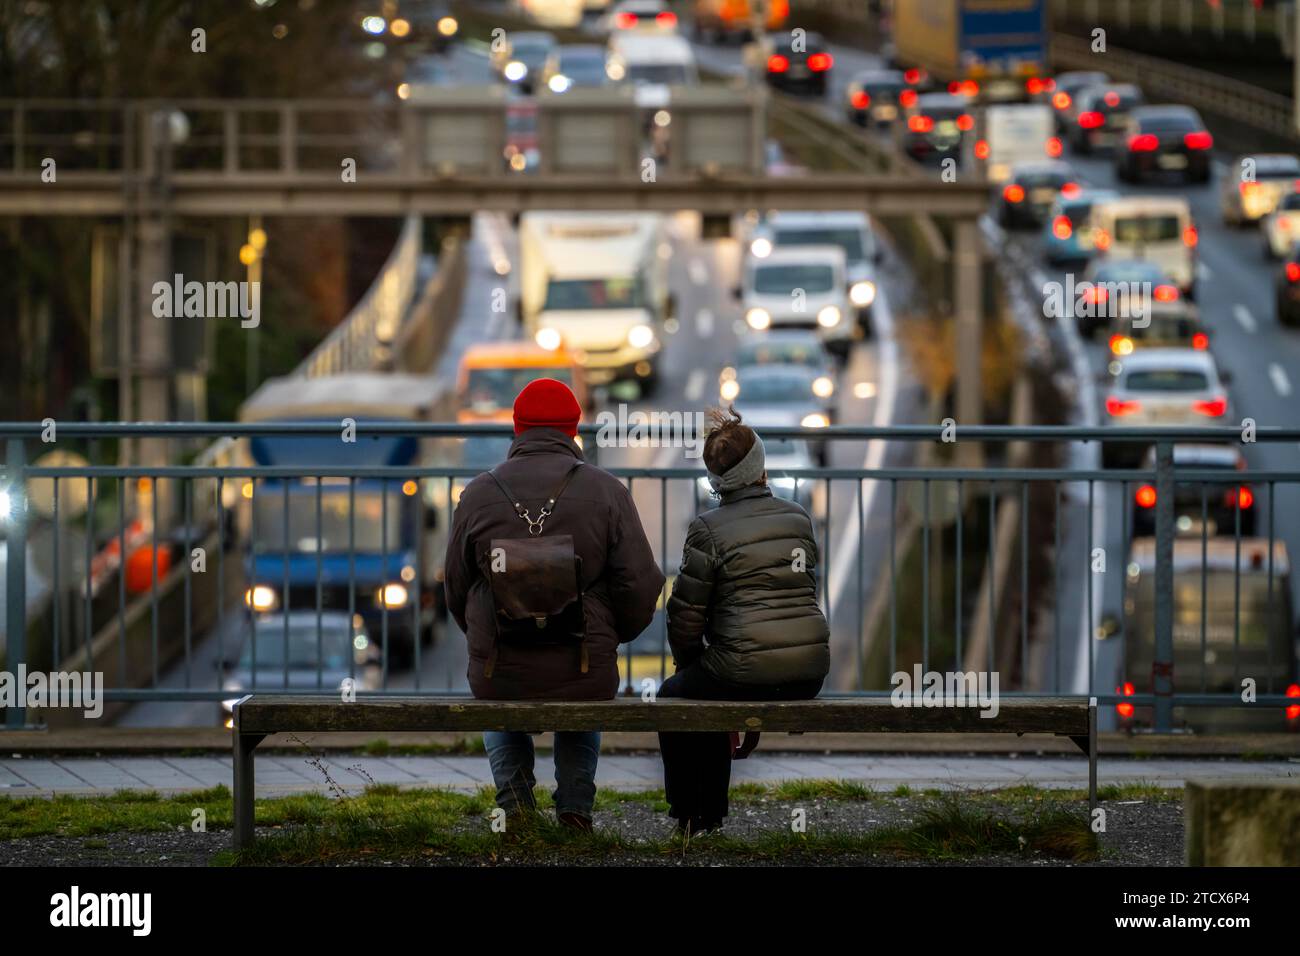 Traffic jam on the A40 motorway, city passage, Essen-Huttrop junction, traffic jam in both directions, 2 people looking at the traffic jam, at the Ruh Stock Photo